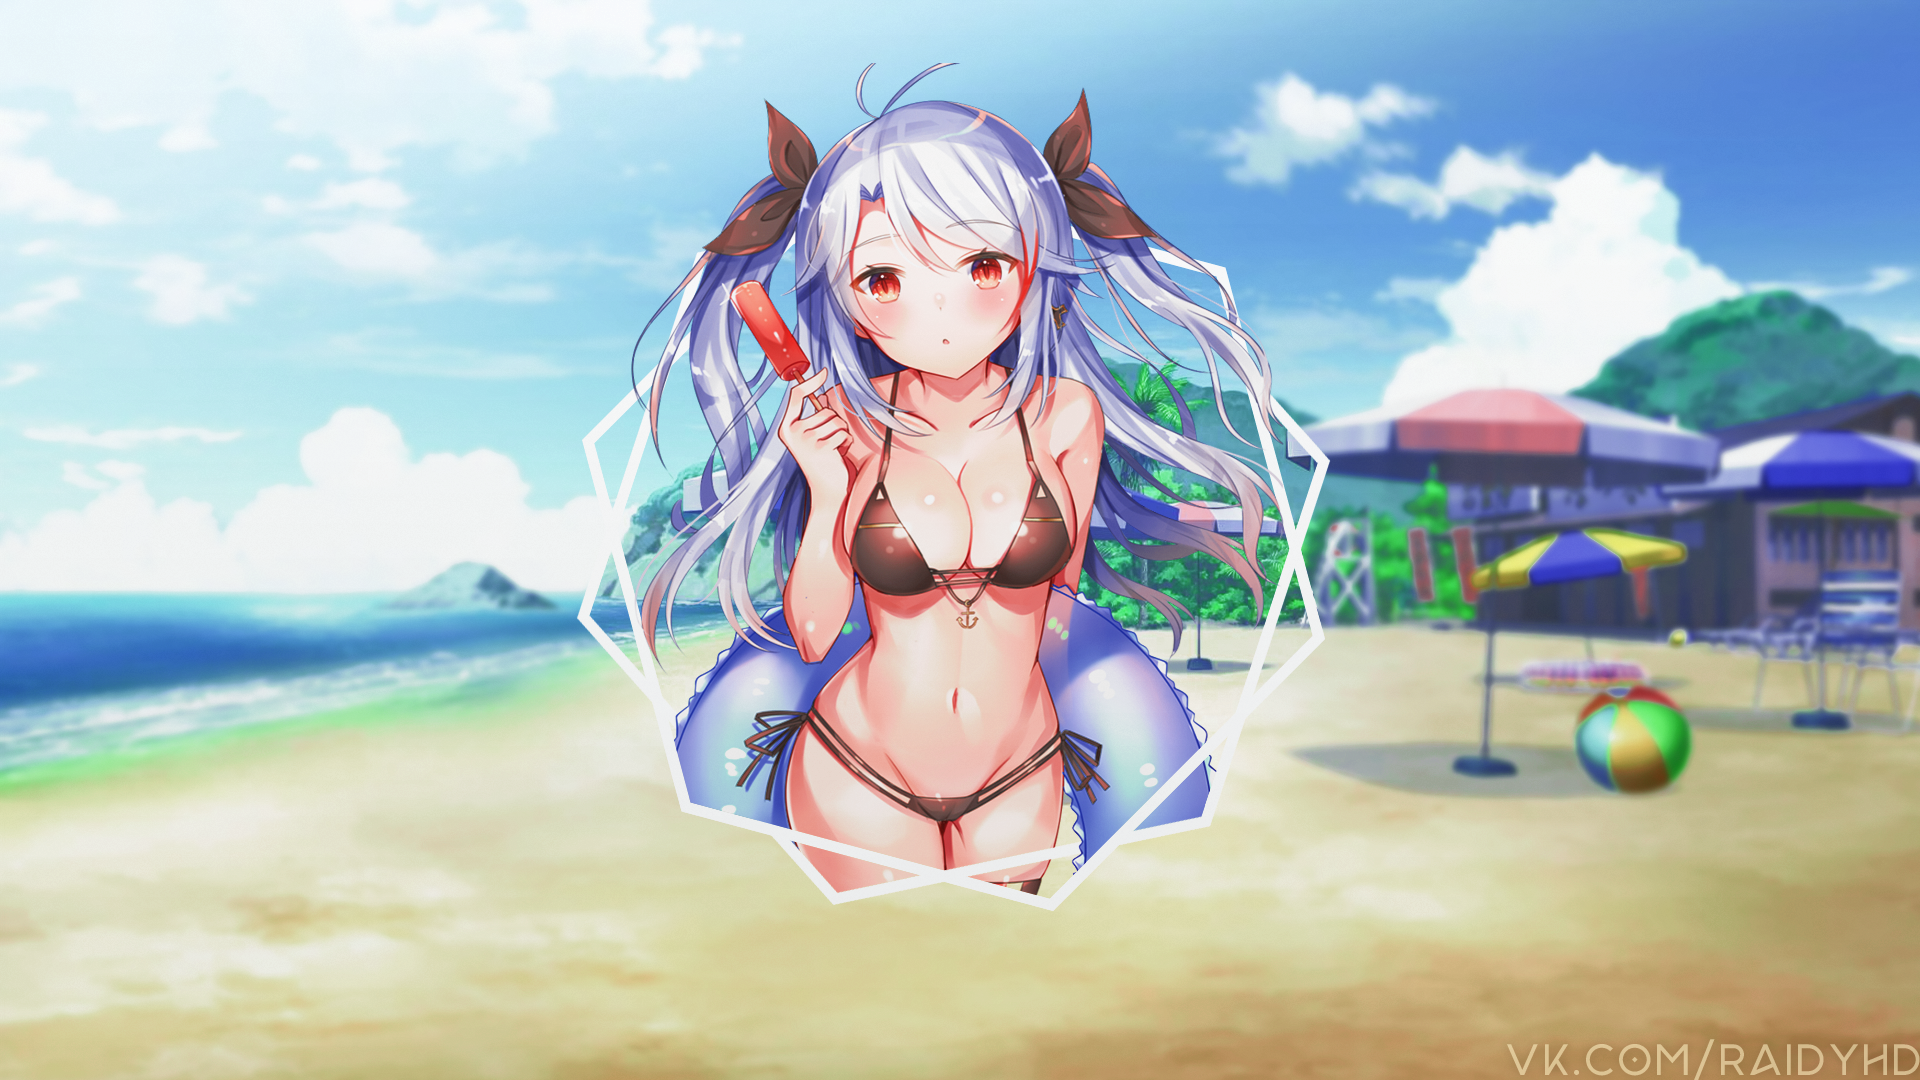 Anime 1920x1080 anime anime girls beach picture-in-picture big boobs beach ball parasol popsicle ice cream cleavage